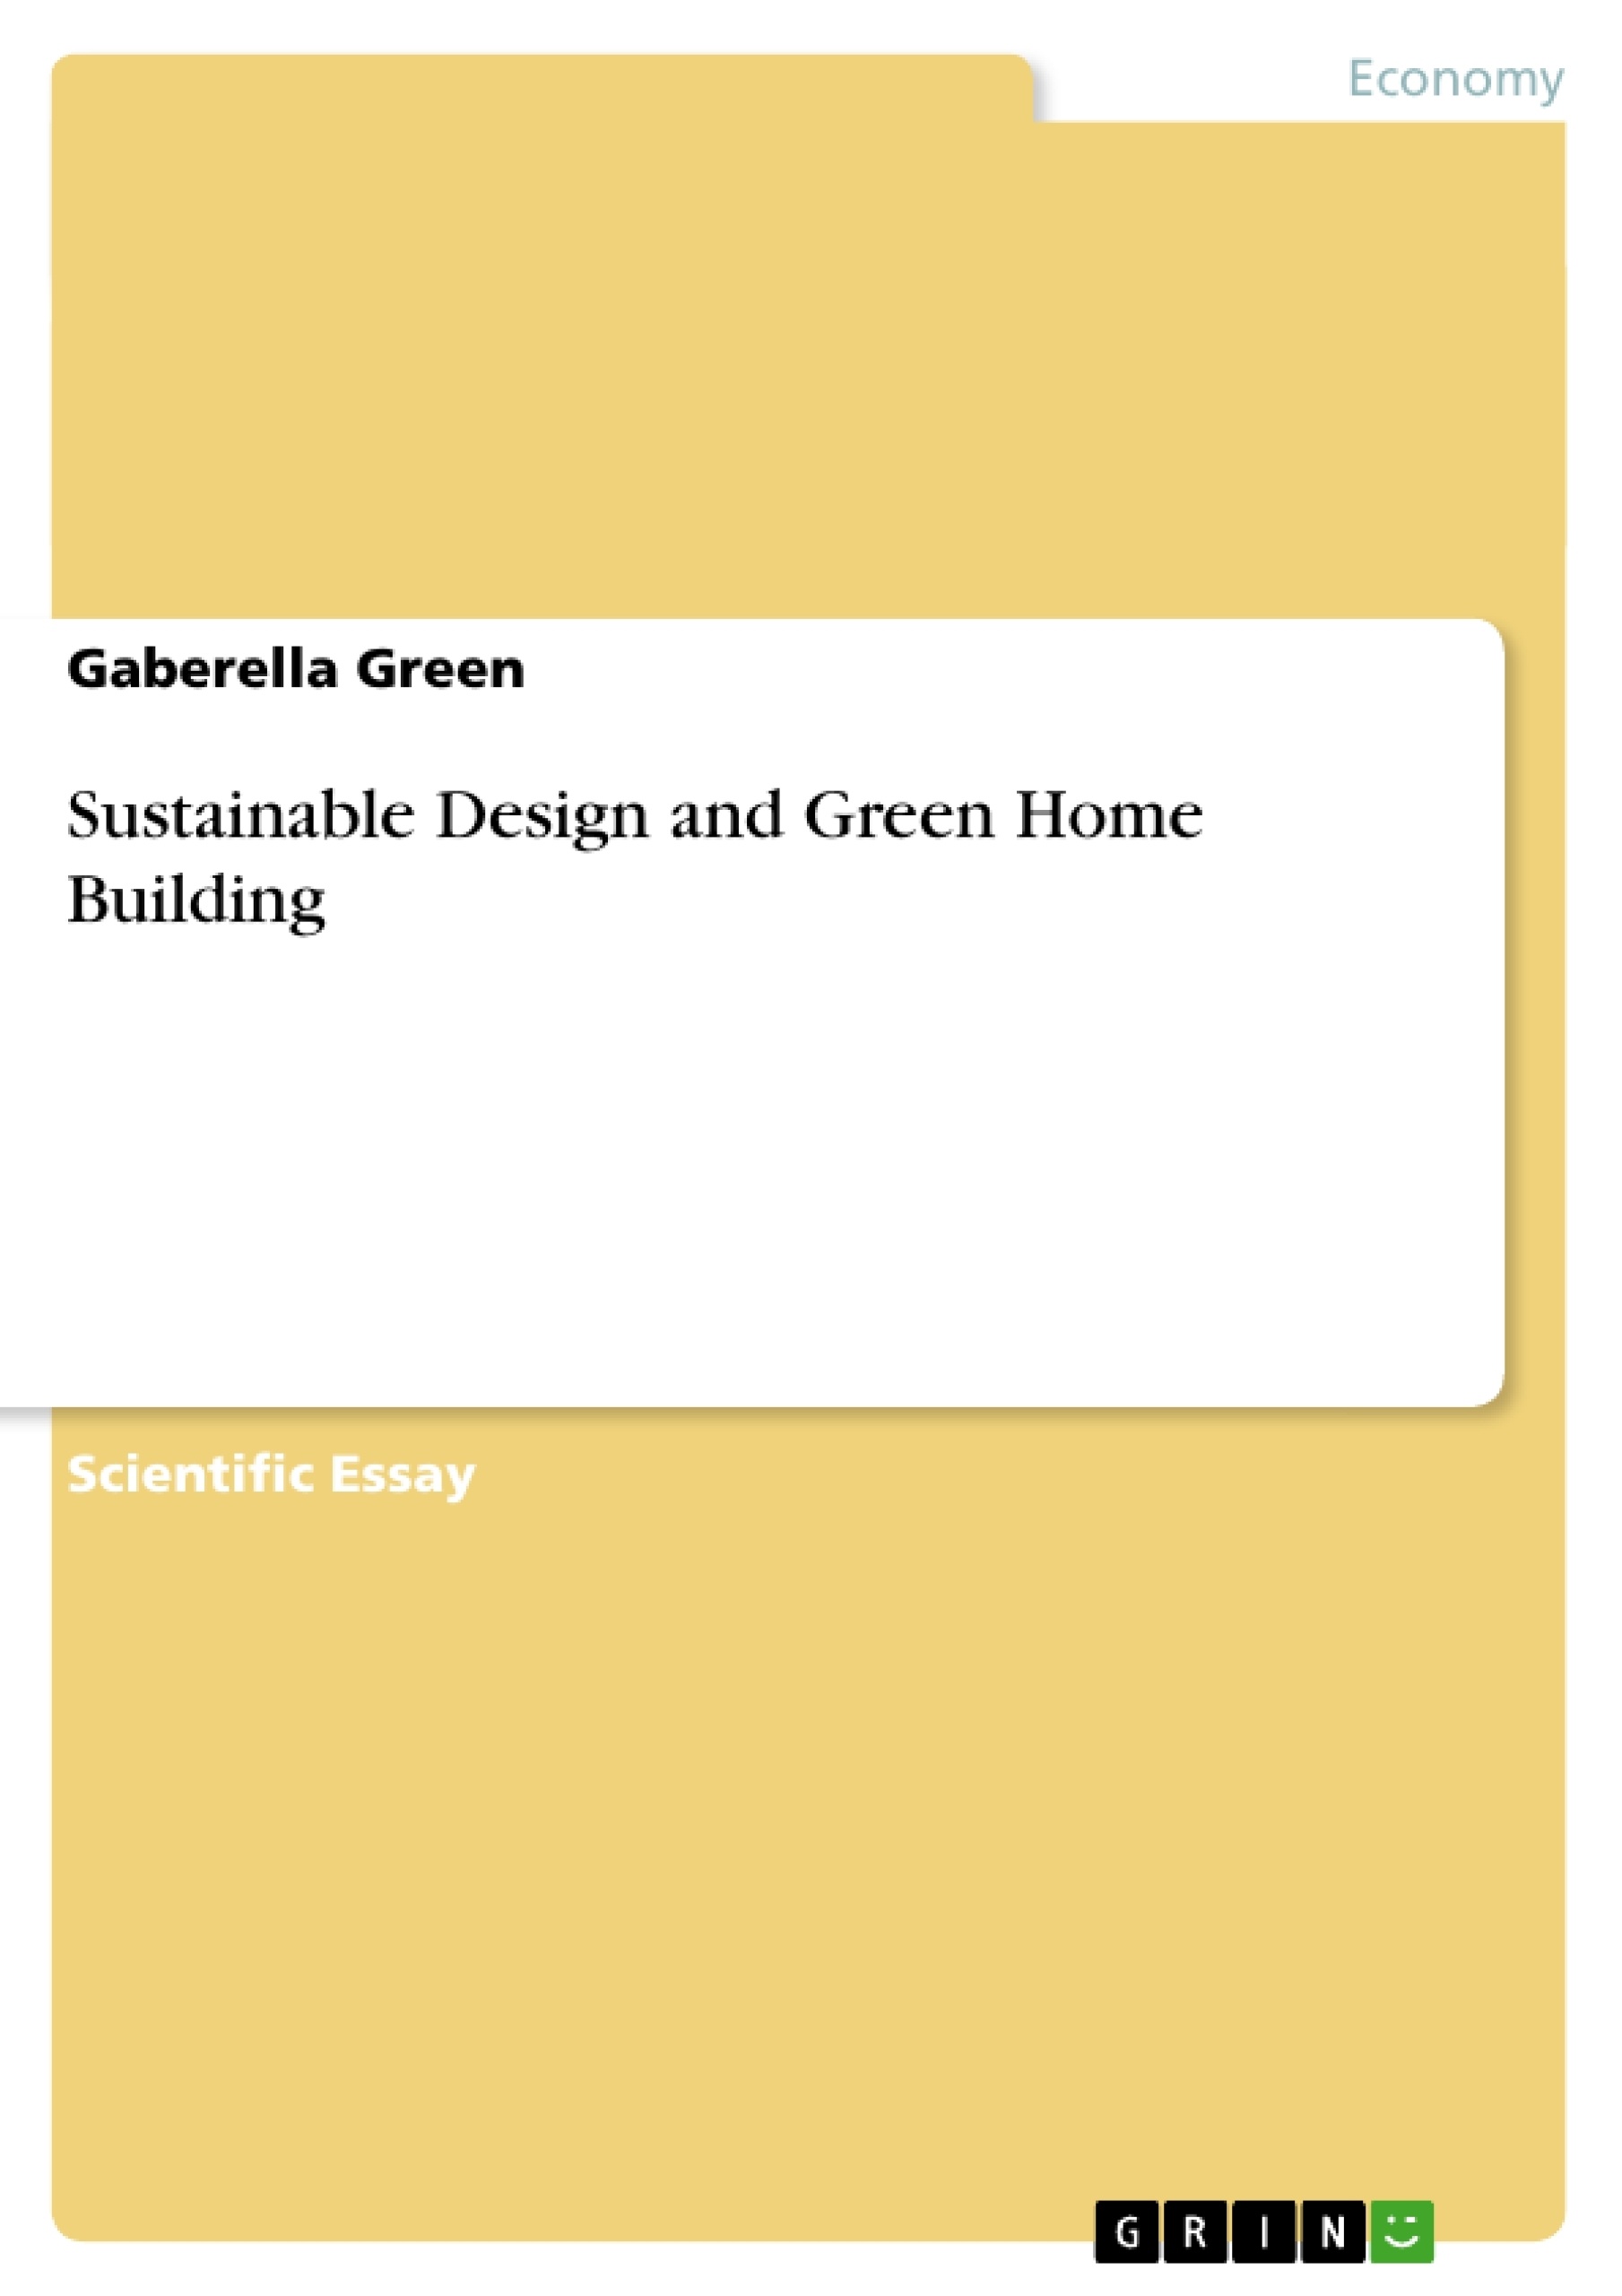 Título: Sustainable Design and Green Home Building